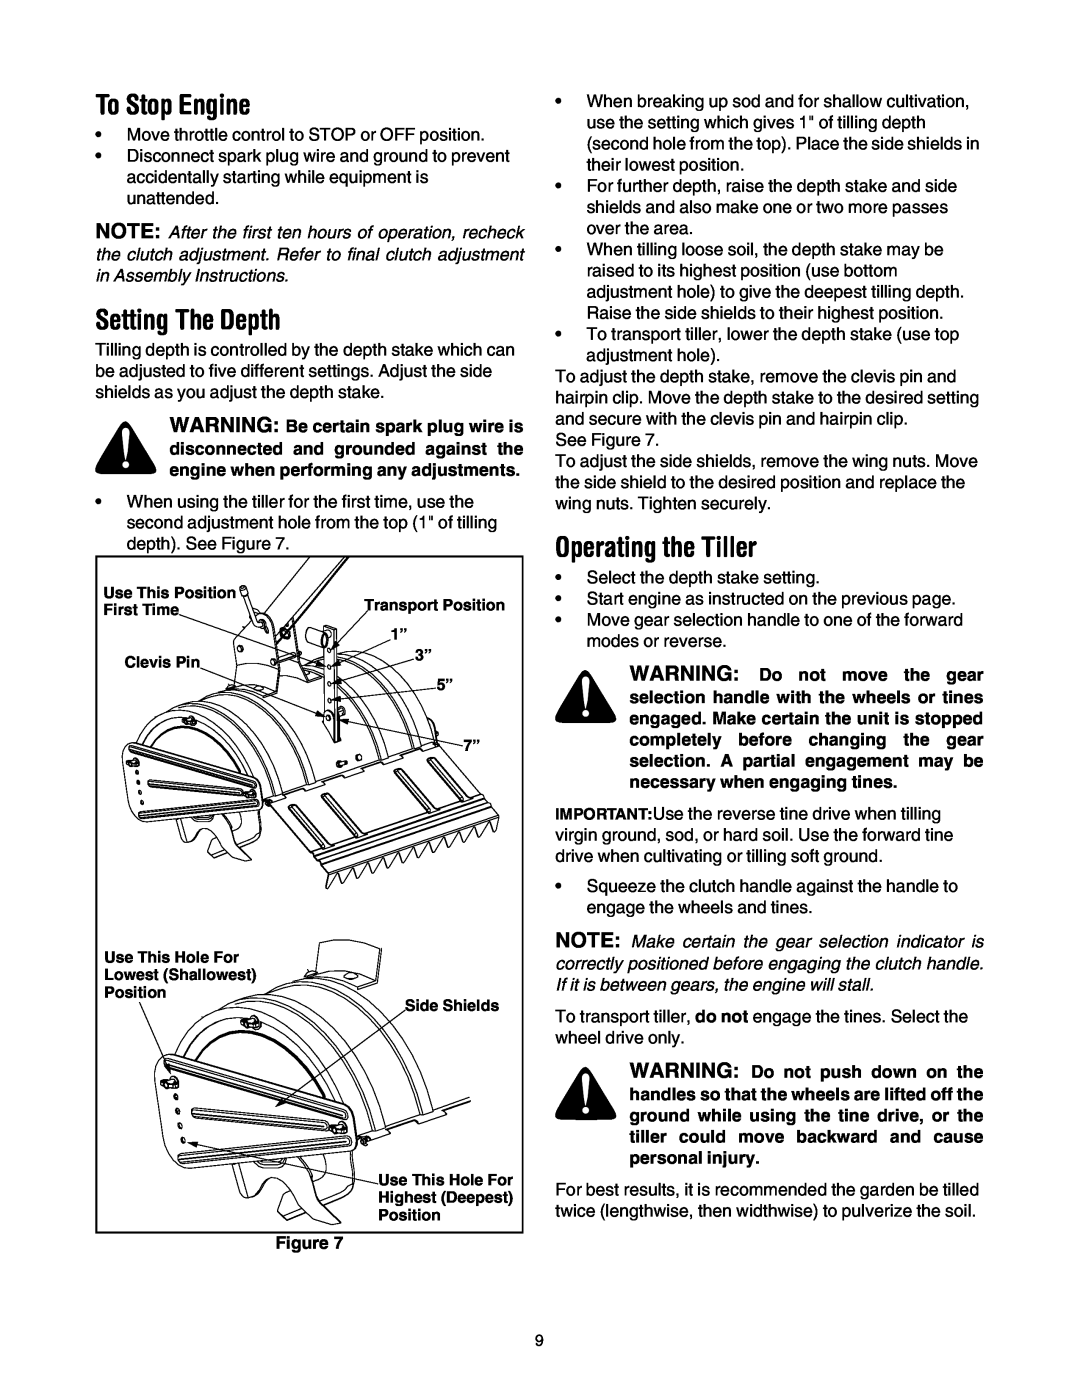 MTD 454 manual To Stop Engine, Setting The Depth, Operating the Tiller 